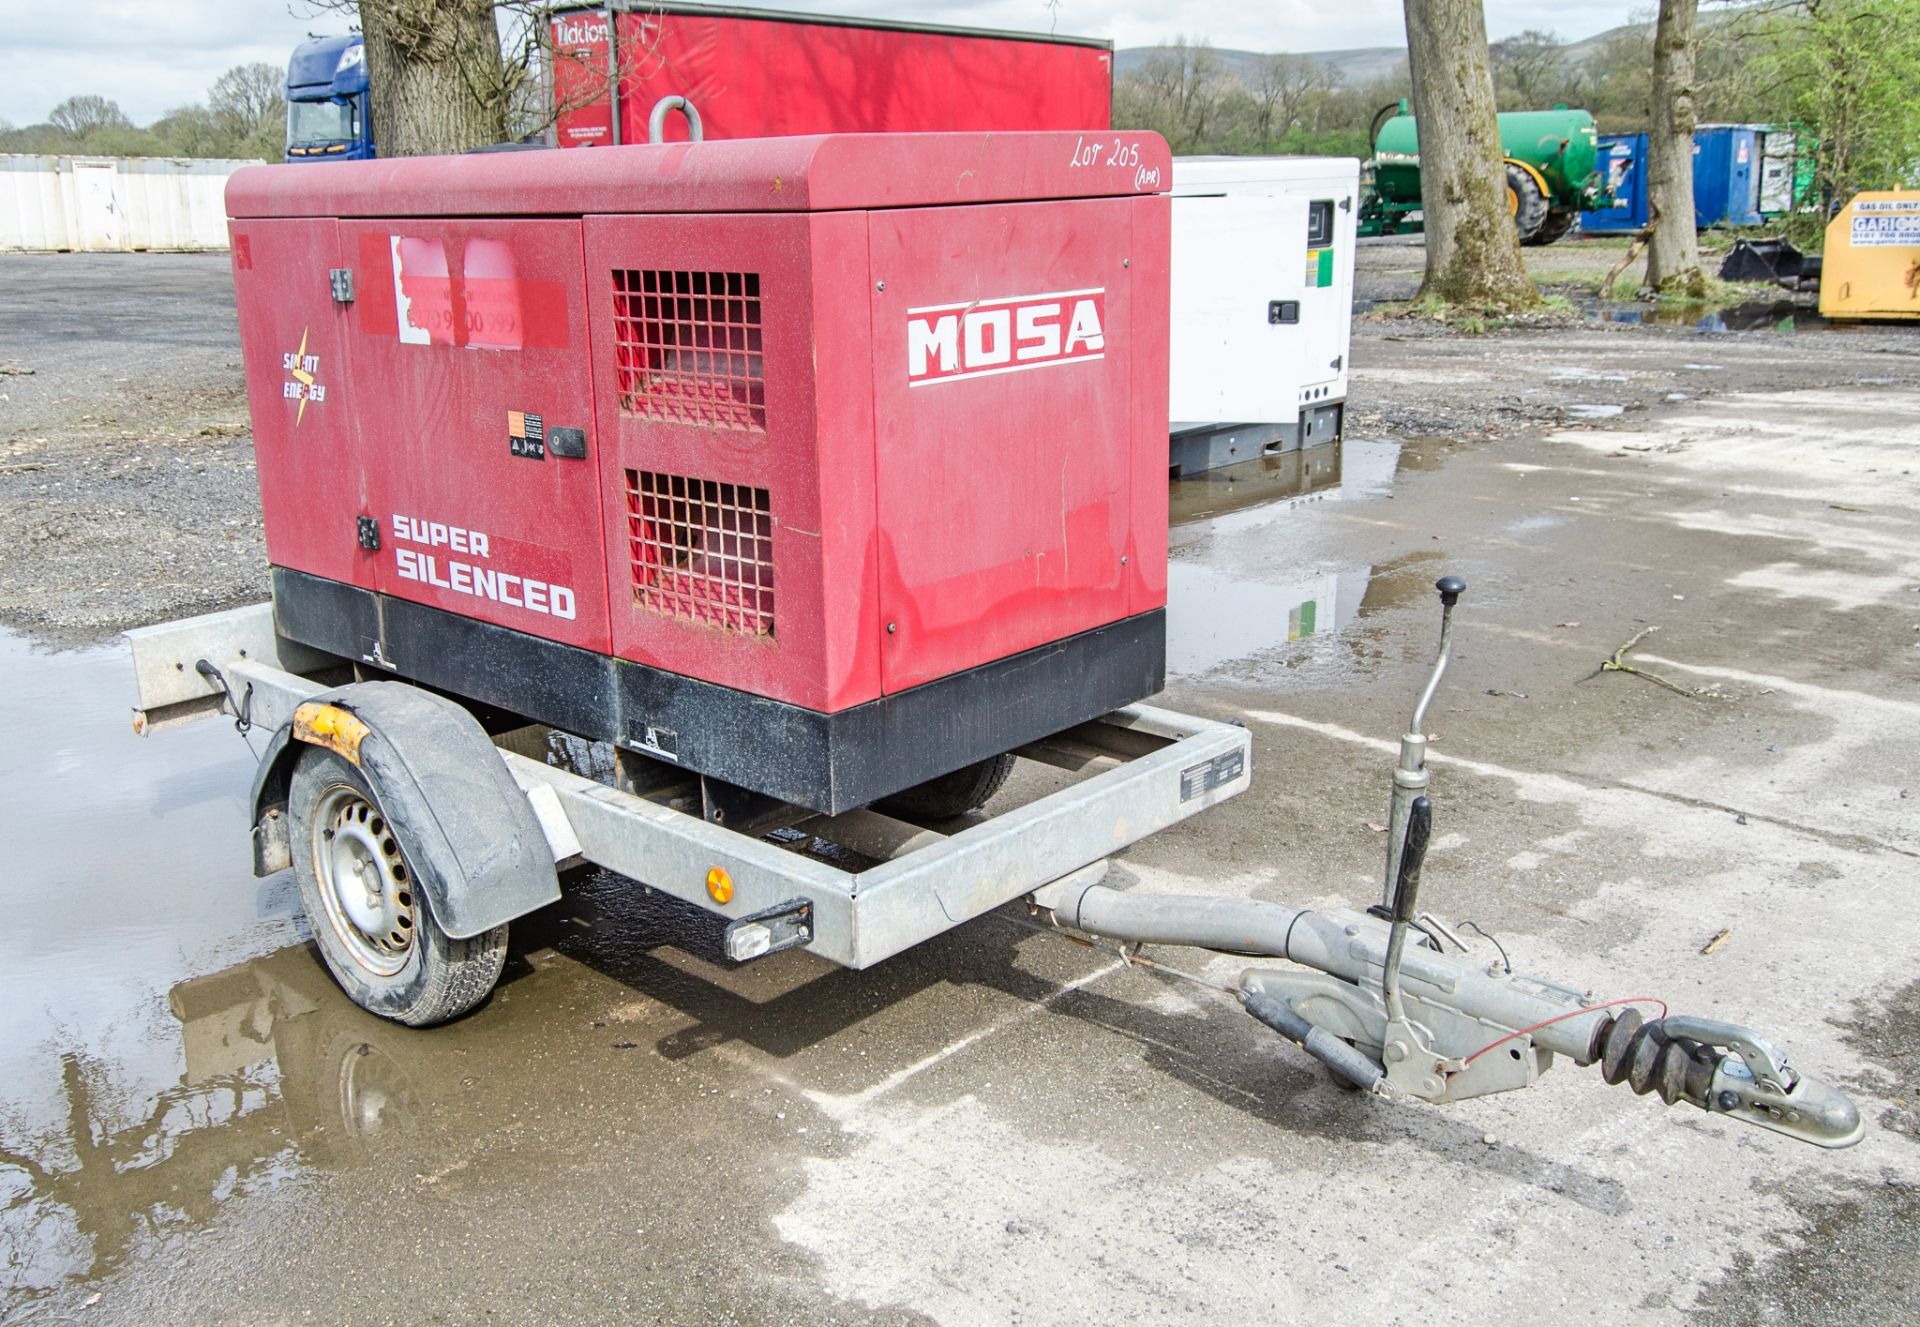 Mosa GE20 YSX 20 kva diesel driven fast tow mobile generator Year: 2015 S/N: 44516 PF00132 - Image 2 of 7